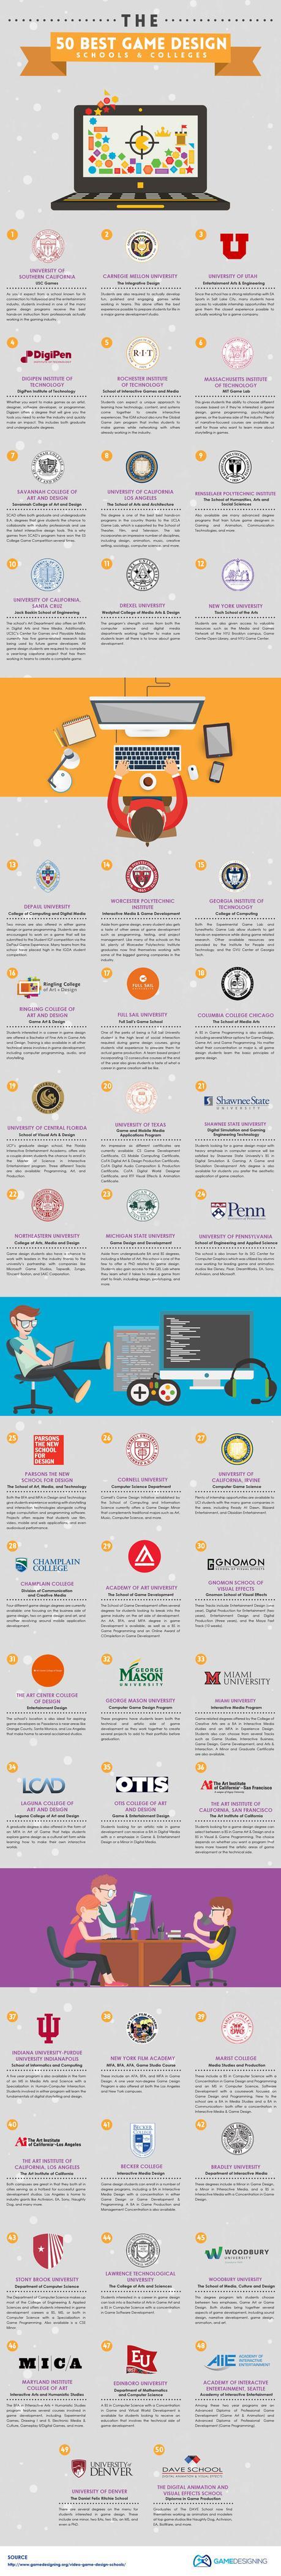 Best Schools For Video Game Design Infographic